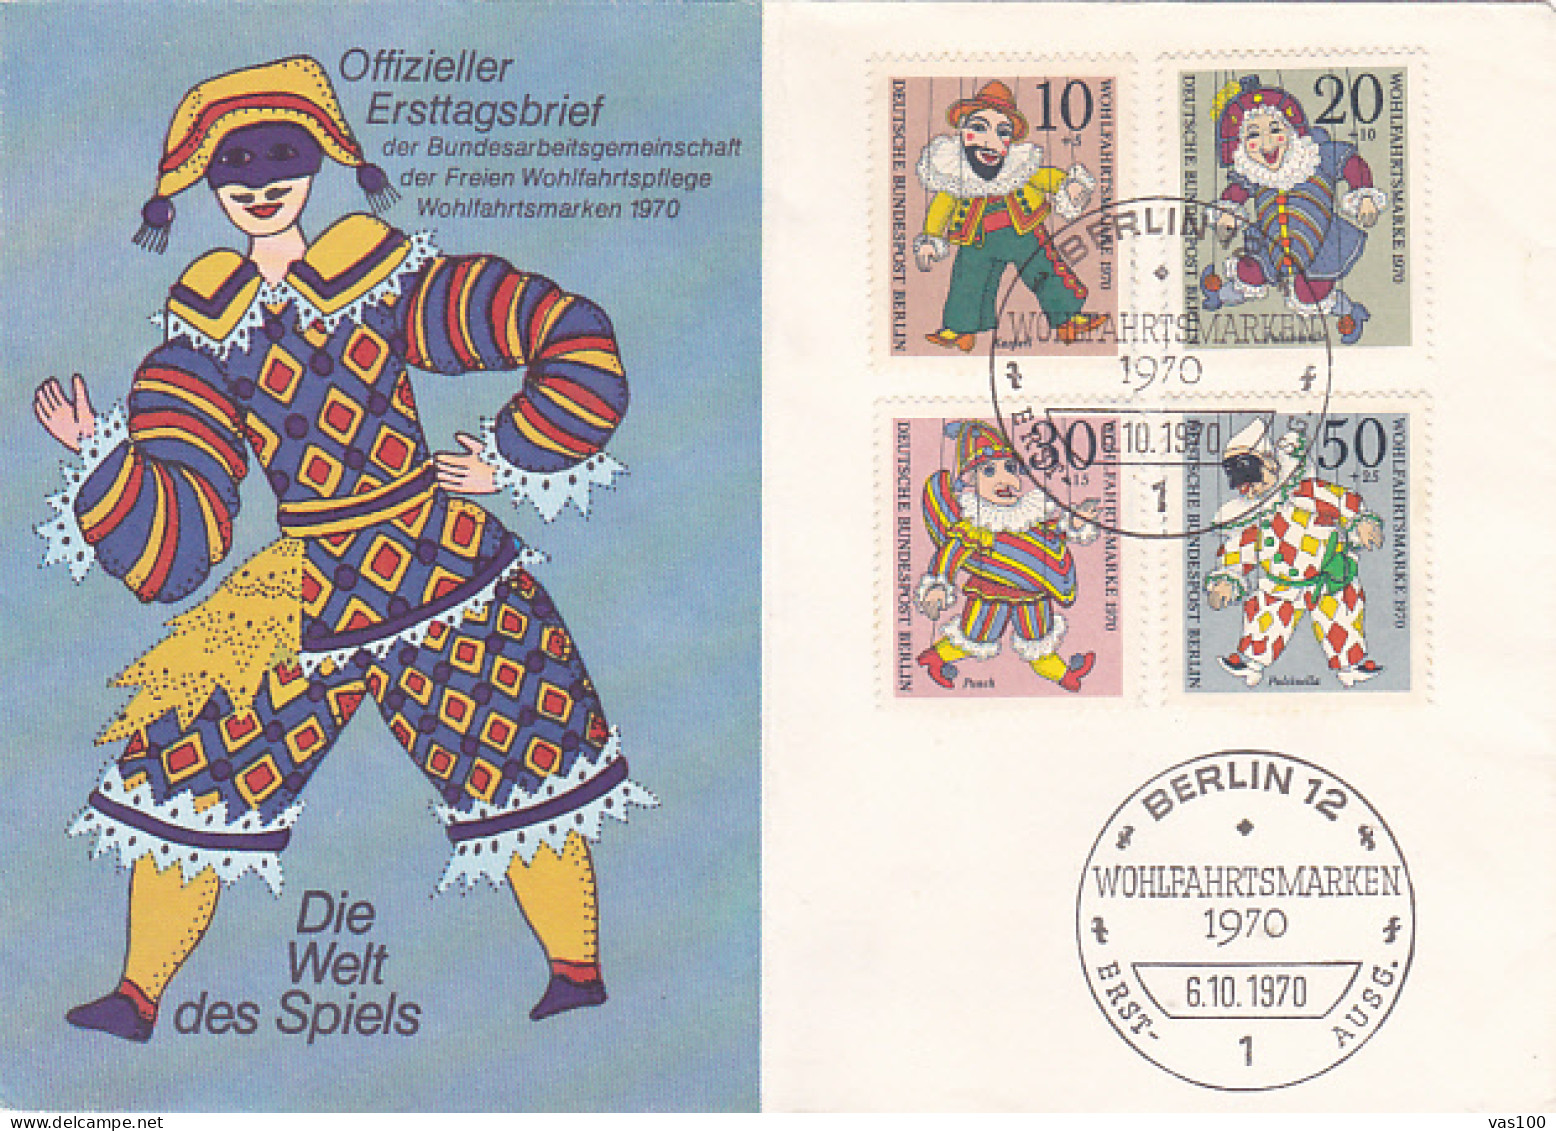 CHILDRENS, PUPPETS, CHARITY STAMPS, COVER FDC, 1970, GERMANY - Marionnetten